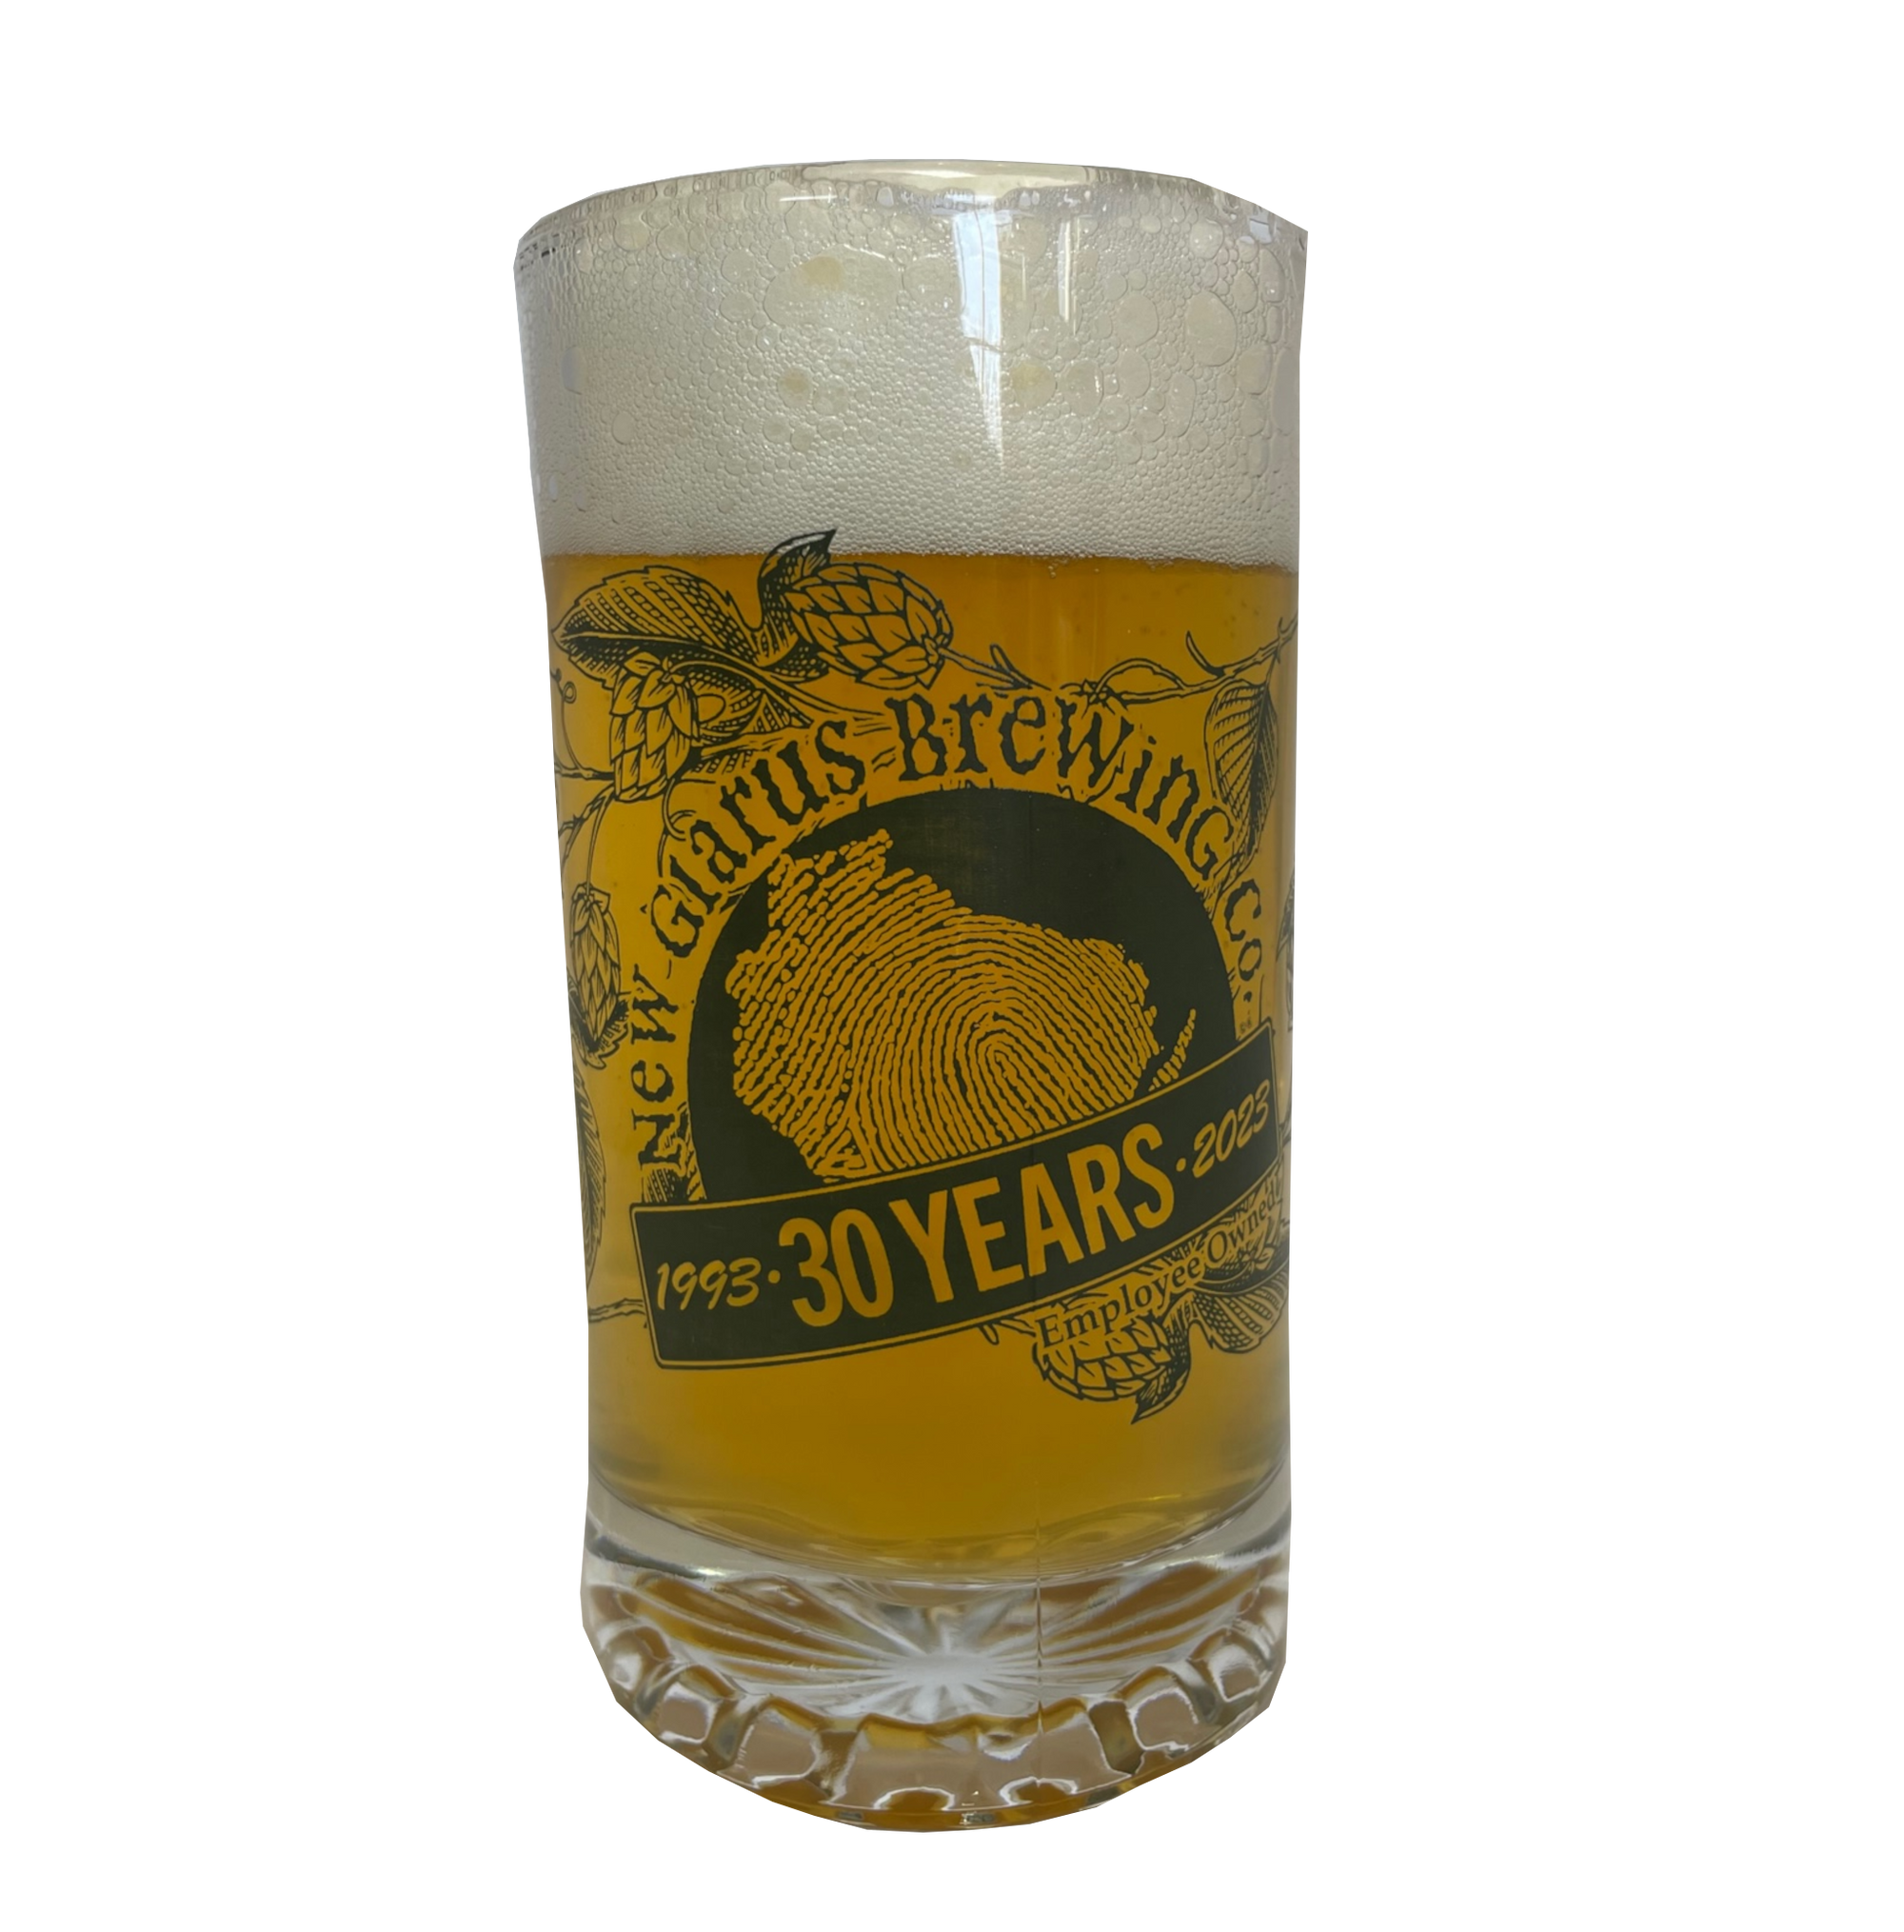 Clear glass handled stein the New Glarus Brewing Co. 1993 - 30 Years - 2023 with hop design in dark green ink